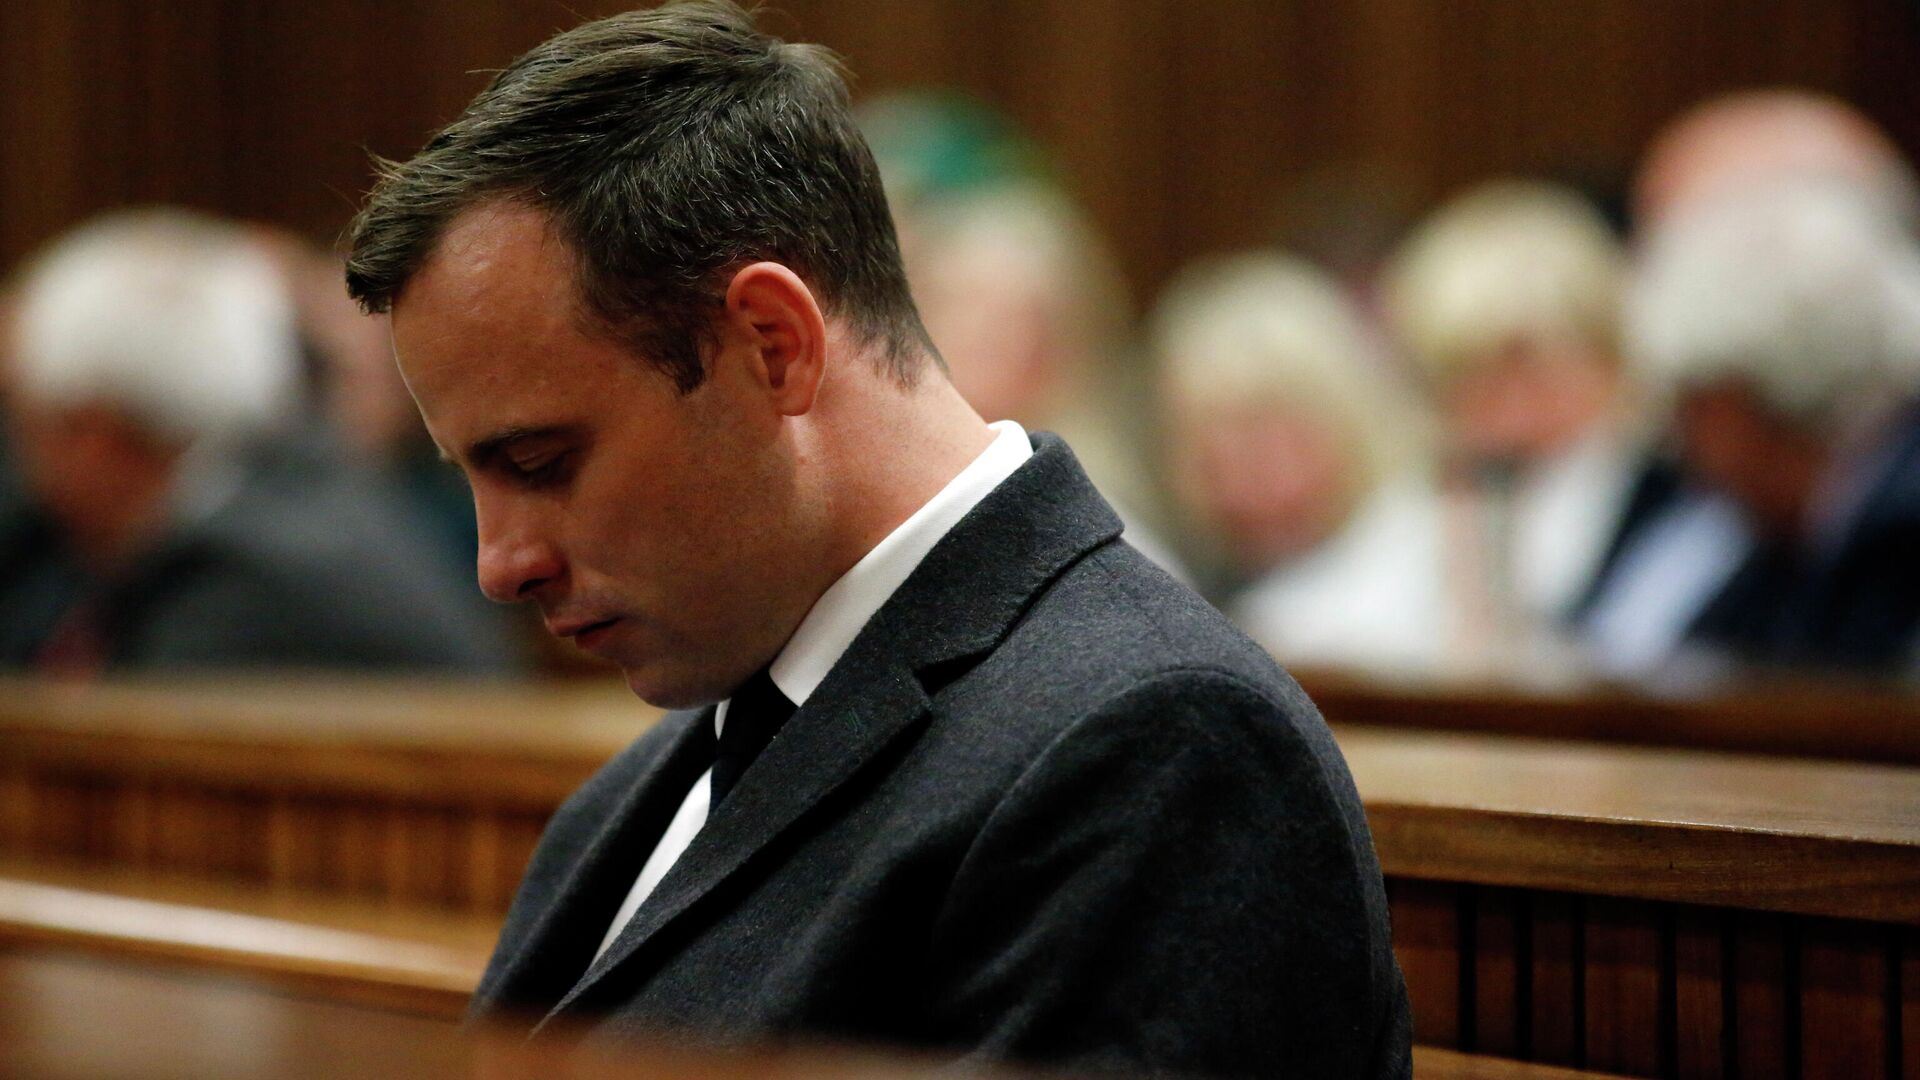 Paralympian athlete Oscar Pistorius (L), accused of the murder of his girlfriend Reeva Steenkamp three years ago, looks on during the hearing in his murder trail at the High Court in Pretoria, on July 6, 2016. - Paralympian Oscar Pistorius will learn on July 6 how long he will spend in jail when a judge sentences him for murdering his girlfriend Reeva Steenkamp three years ago. Pistorius was freed from prison in the South African capital Pretoria last October after serving one year of a five-year term for culpable homicide -- the equivalent of manslaughter. (Photo by MARCO LONGARI / POOL / AFP) - РИА Новости, 1920, 29.11.2021